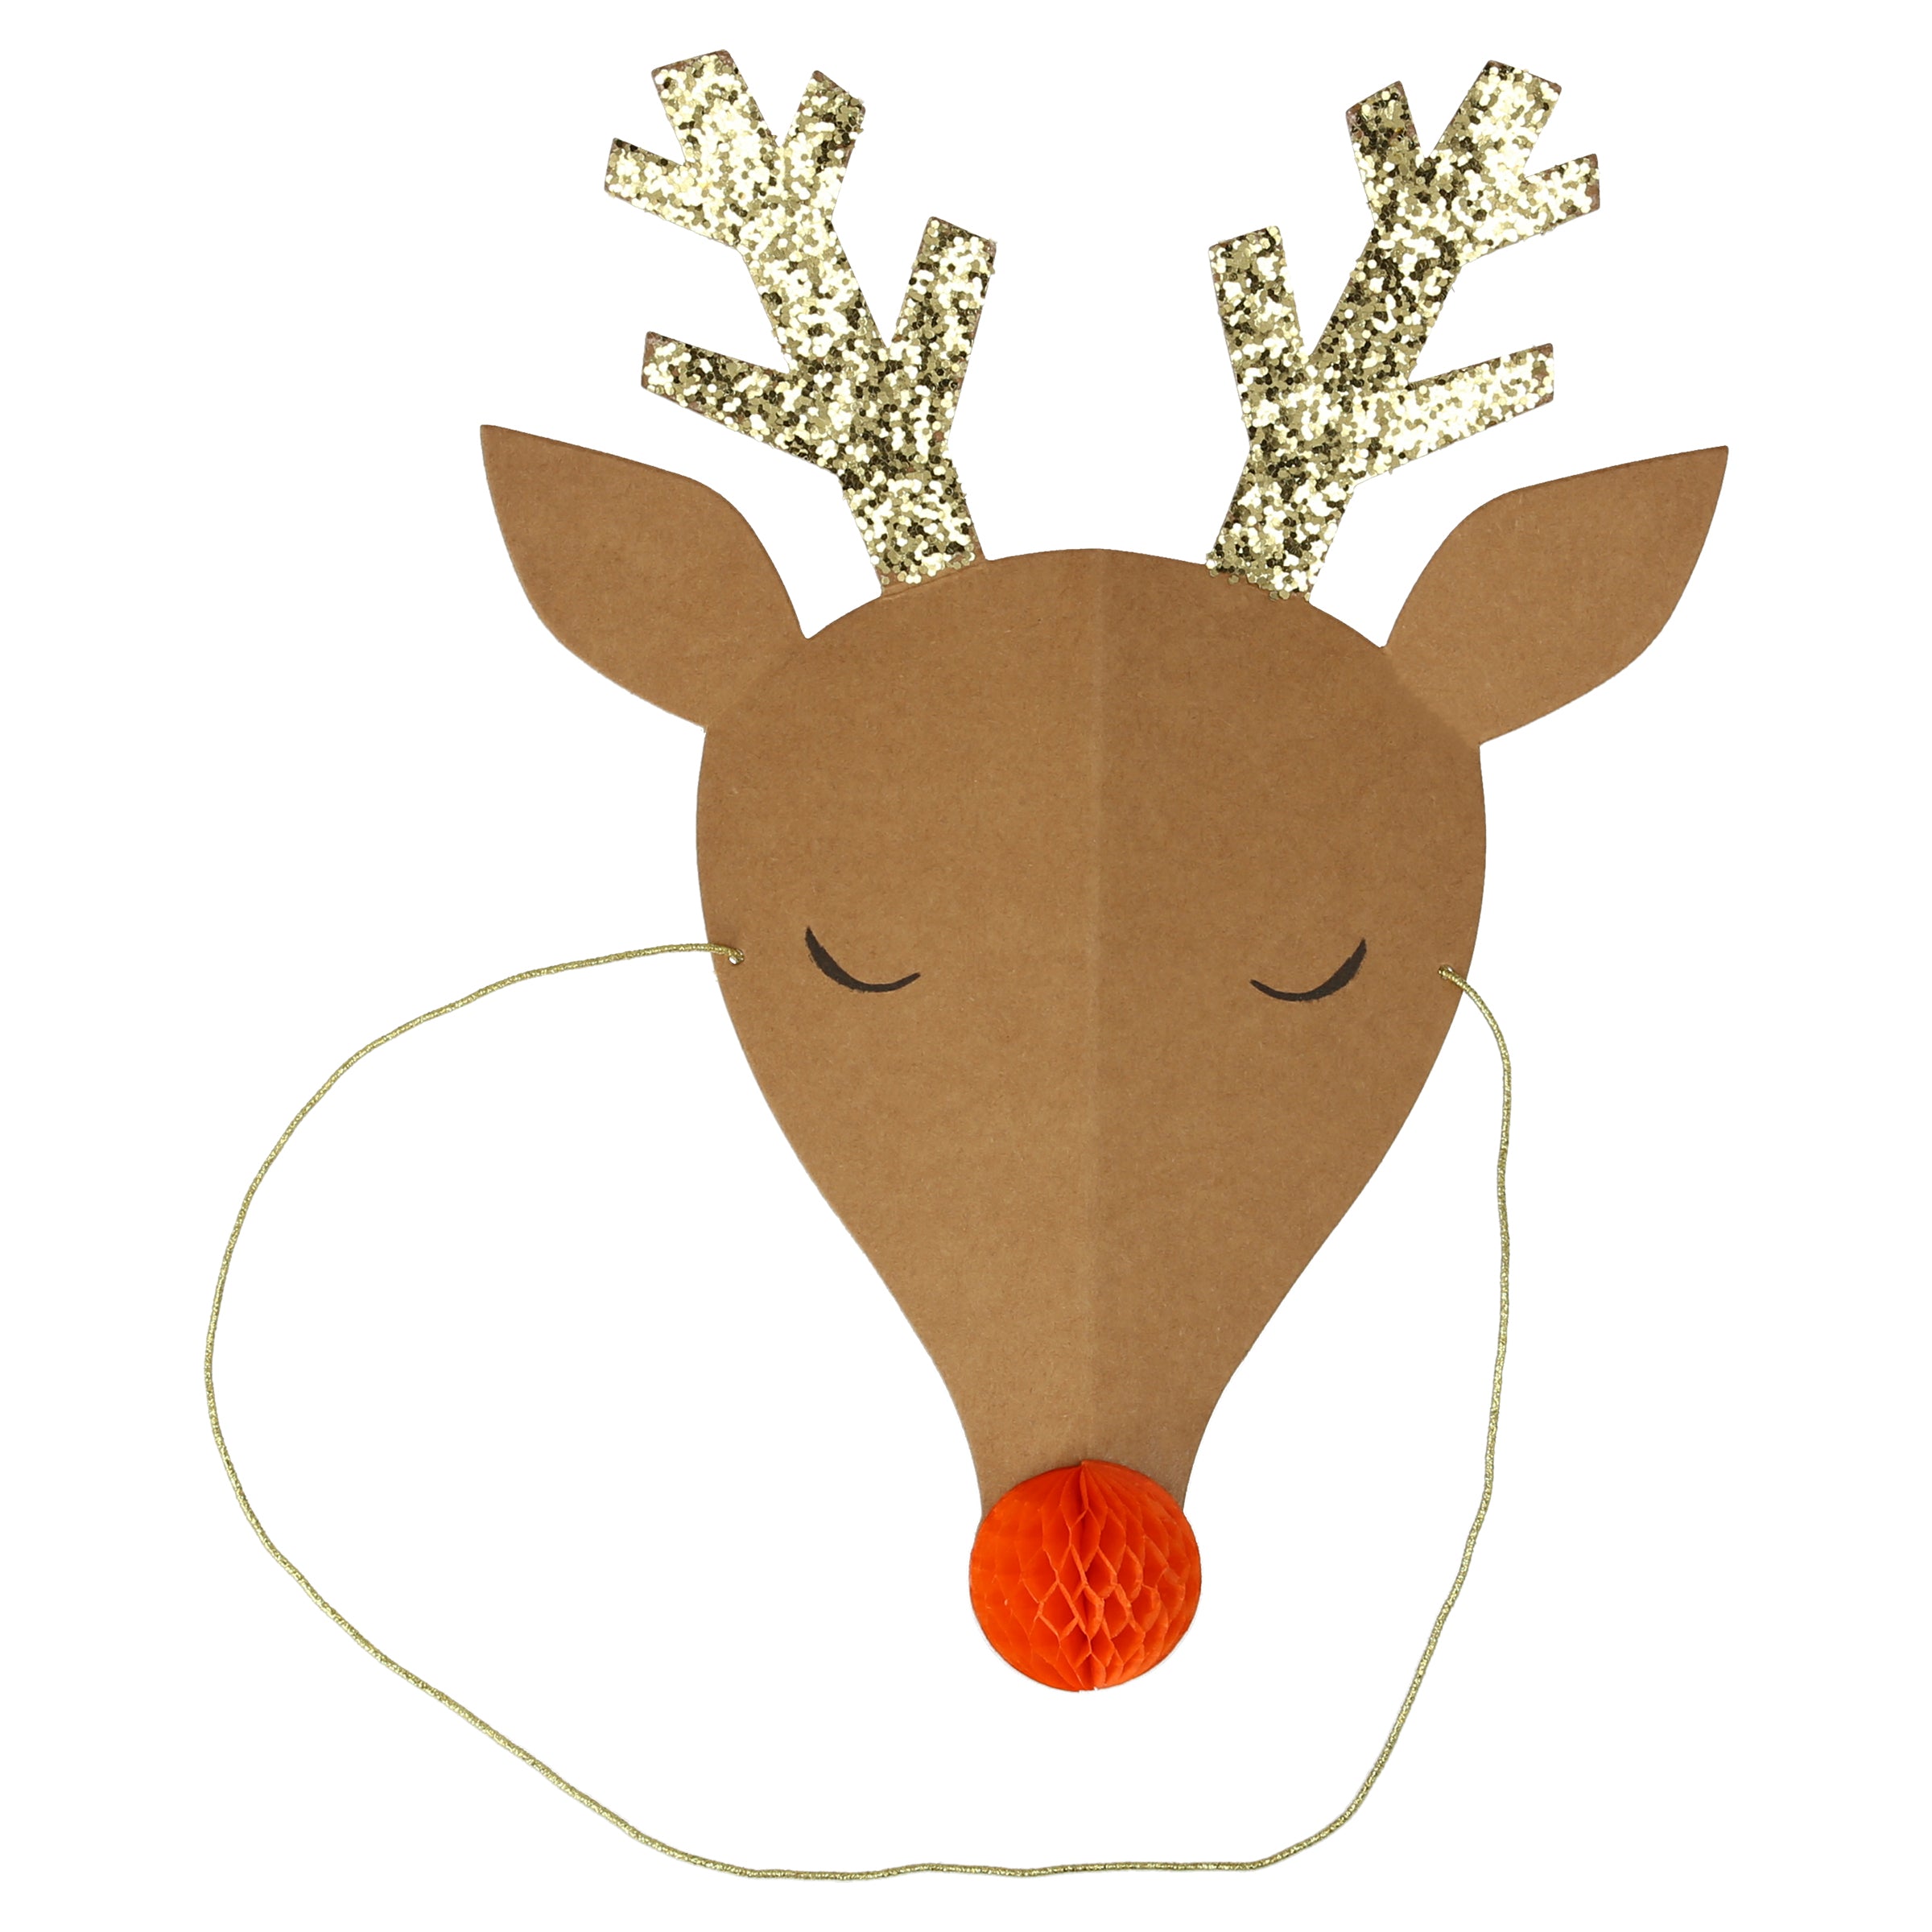 Our reindeer hats make excellent party hats for kids, and fun party hats for adults.